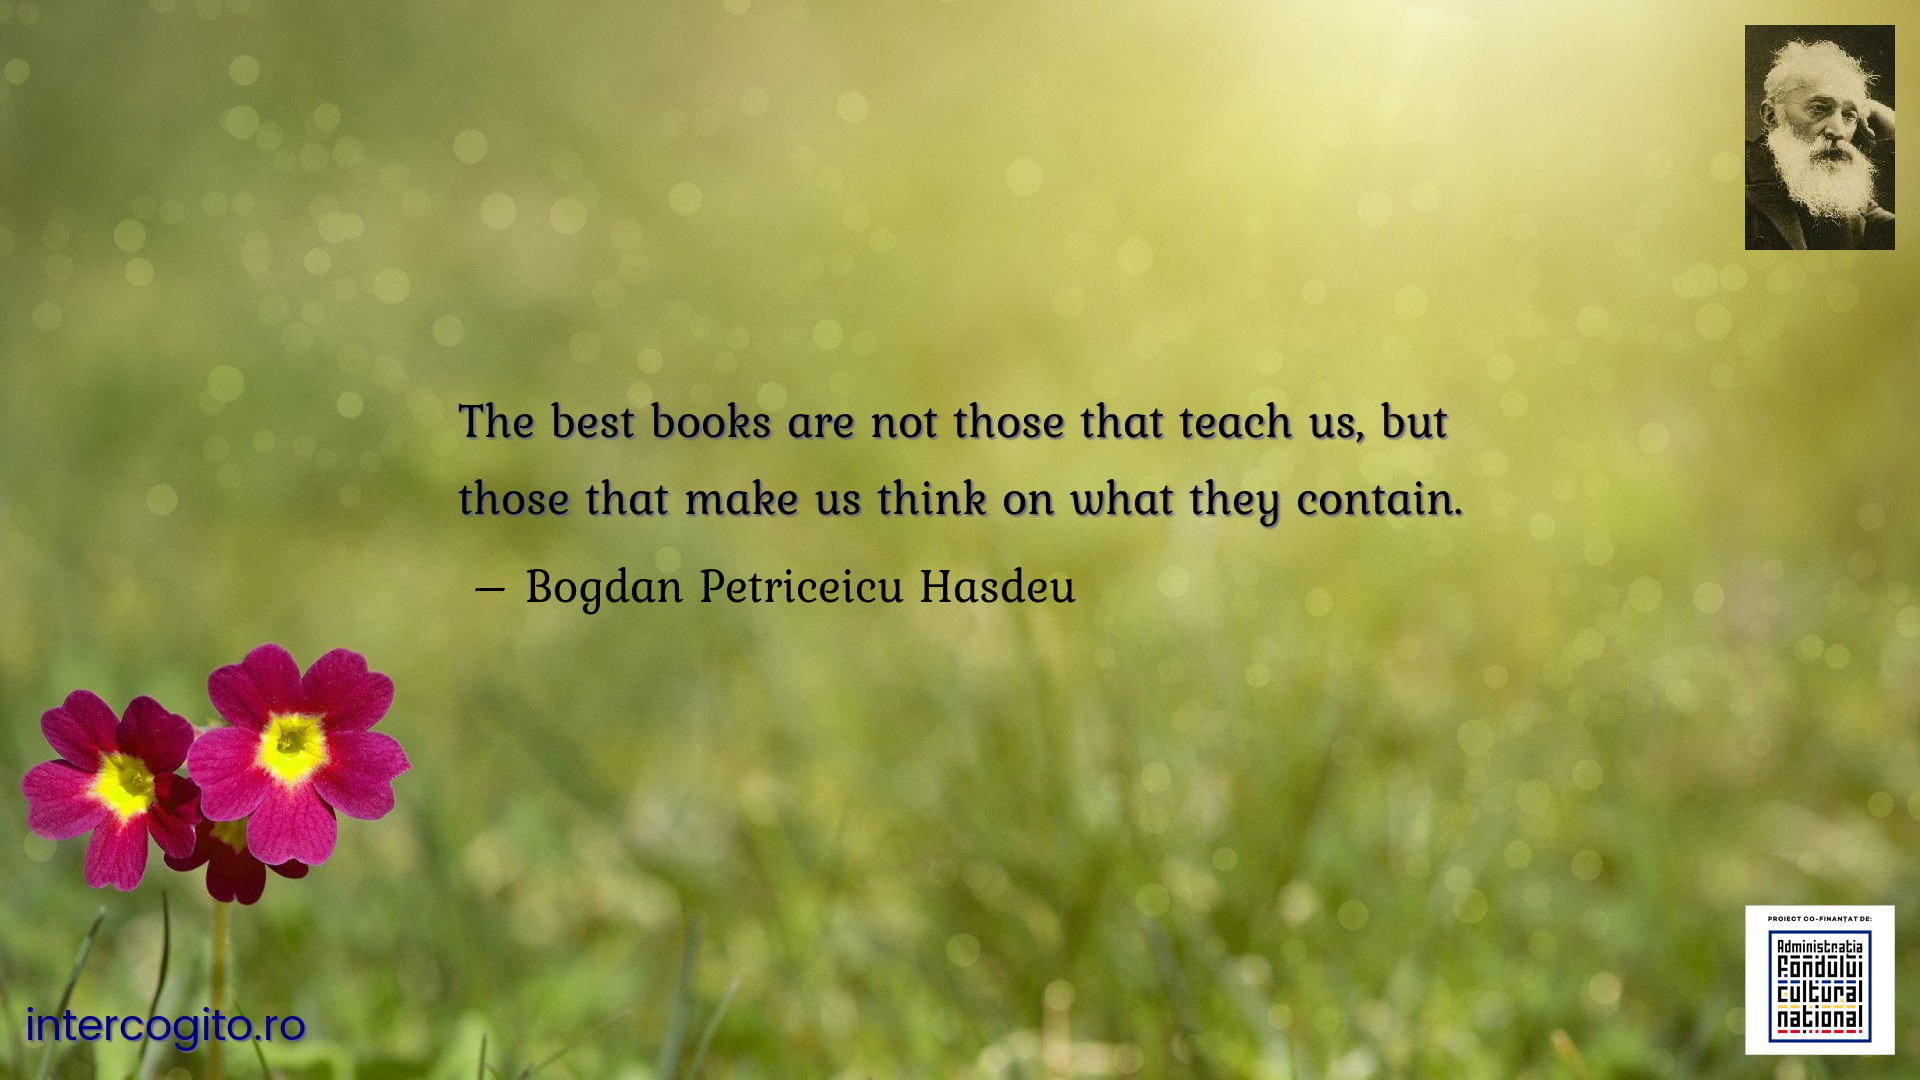 The best books are not those that teach us, but those that make us think on what they contain.